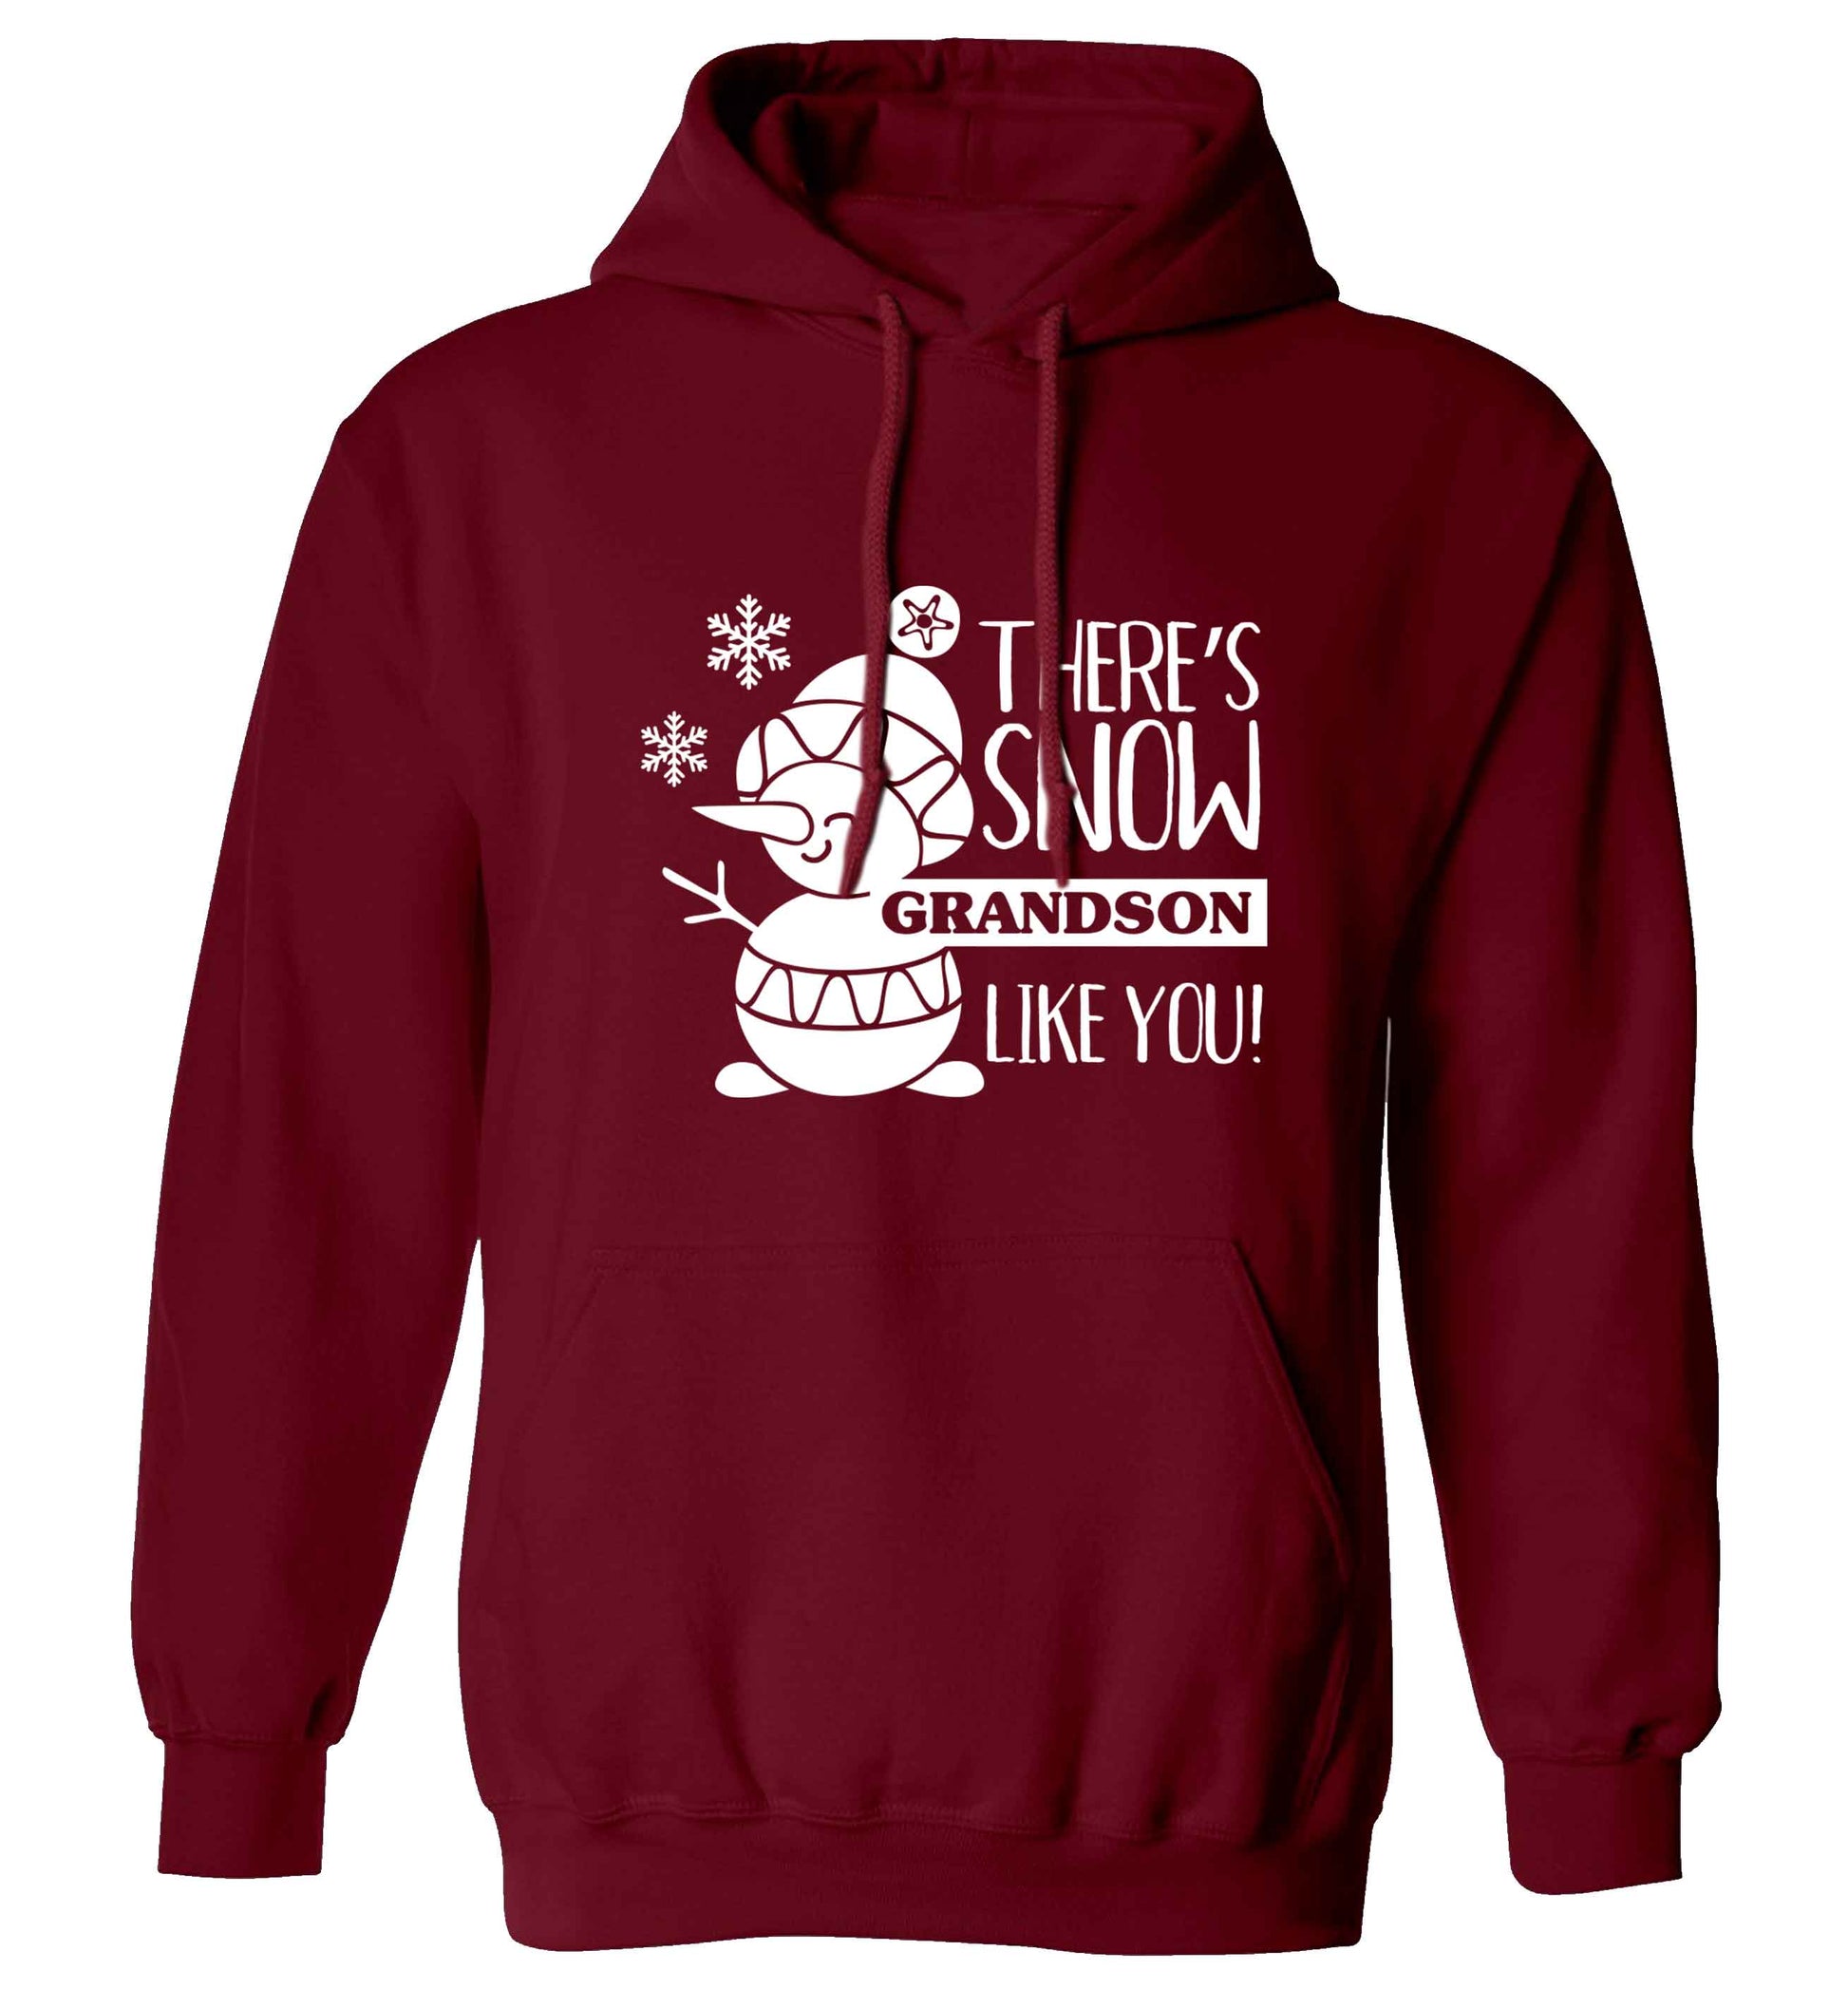 There's snow grandson like you adults unisex maroon hoodie 2XL